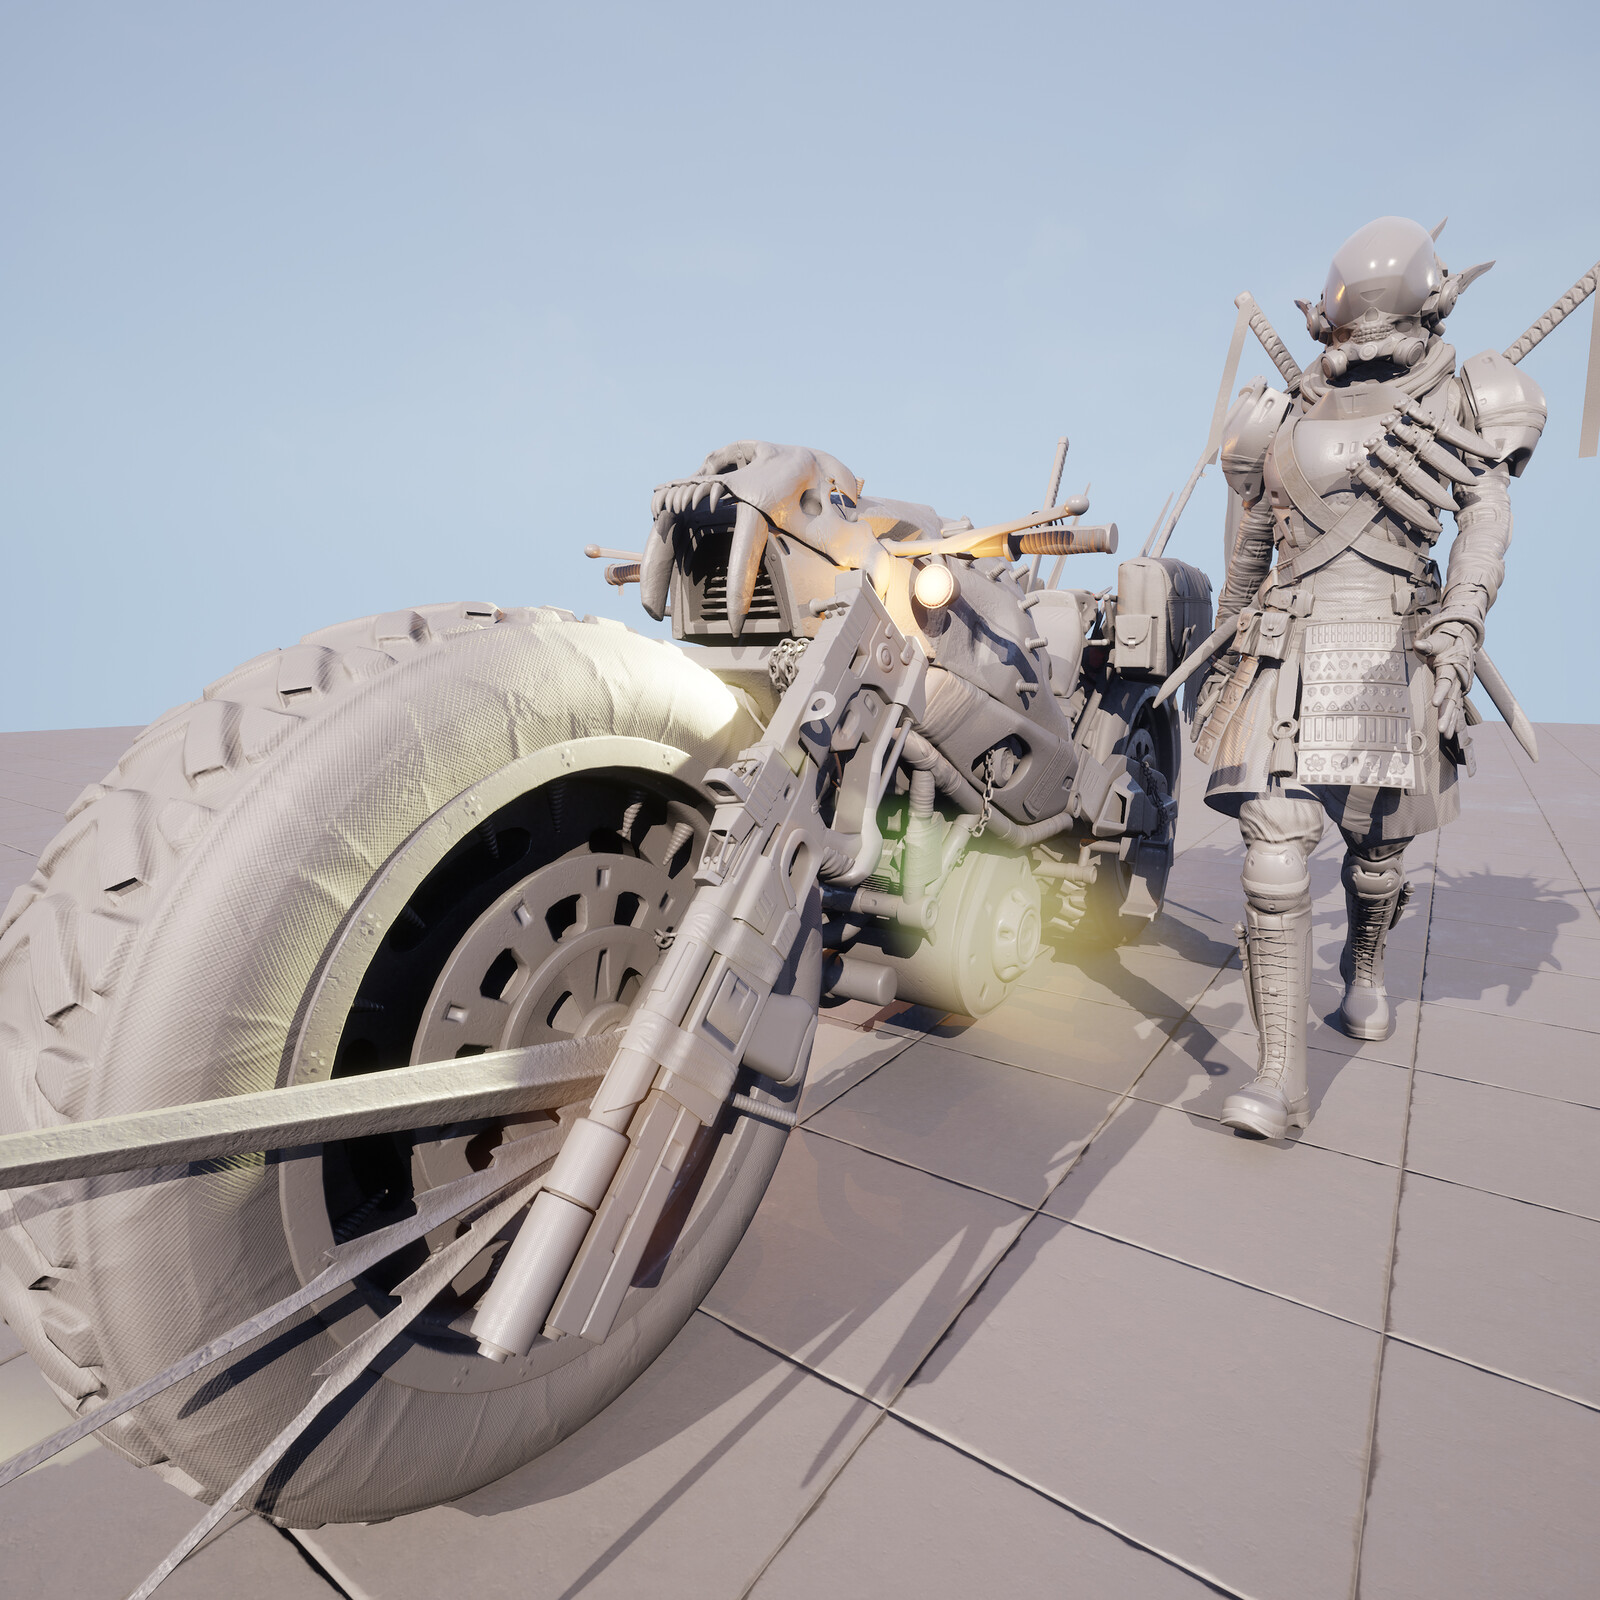 Sci-fi Samurai 3D CG Character and his Mad Max esque motor bike  Real-time UE4 Unreal Engine

Real-time Sci-fi Samurai 3D CG Character UE4 Unreal Engine